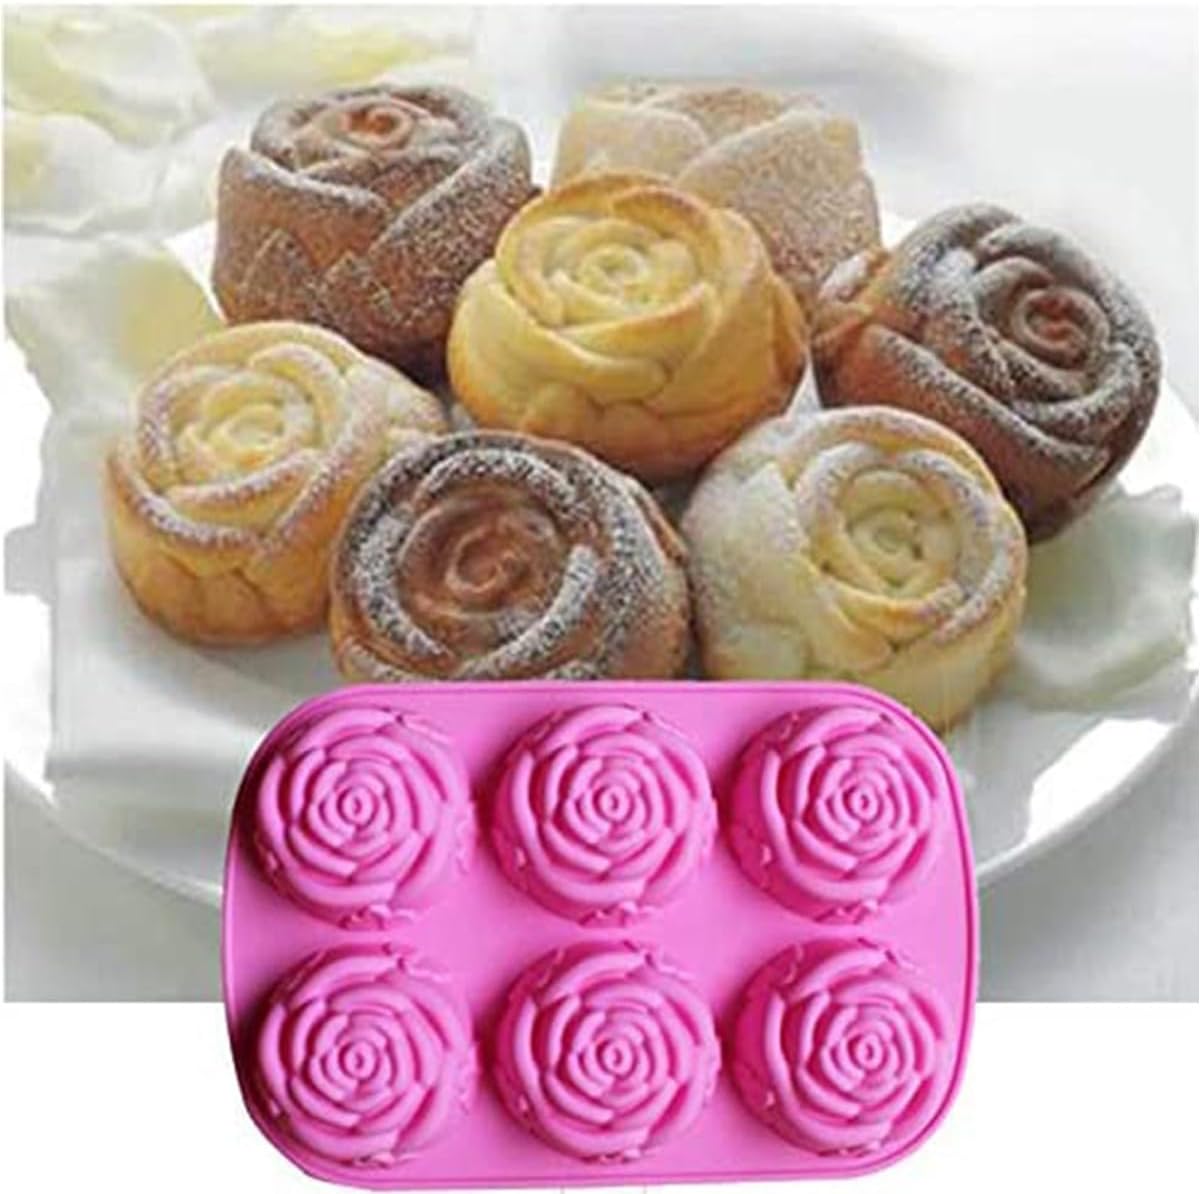 Reusable Rose Flower Silicone Mold for Cake 3 pcs